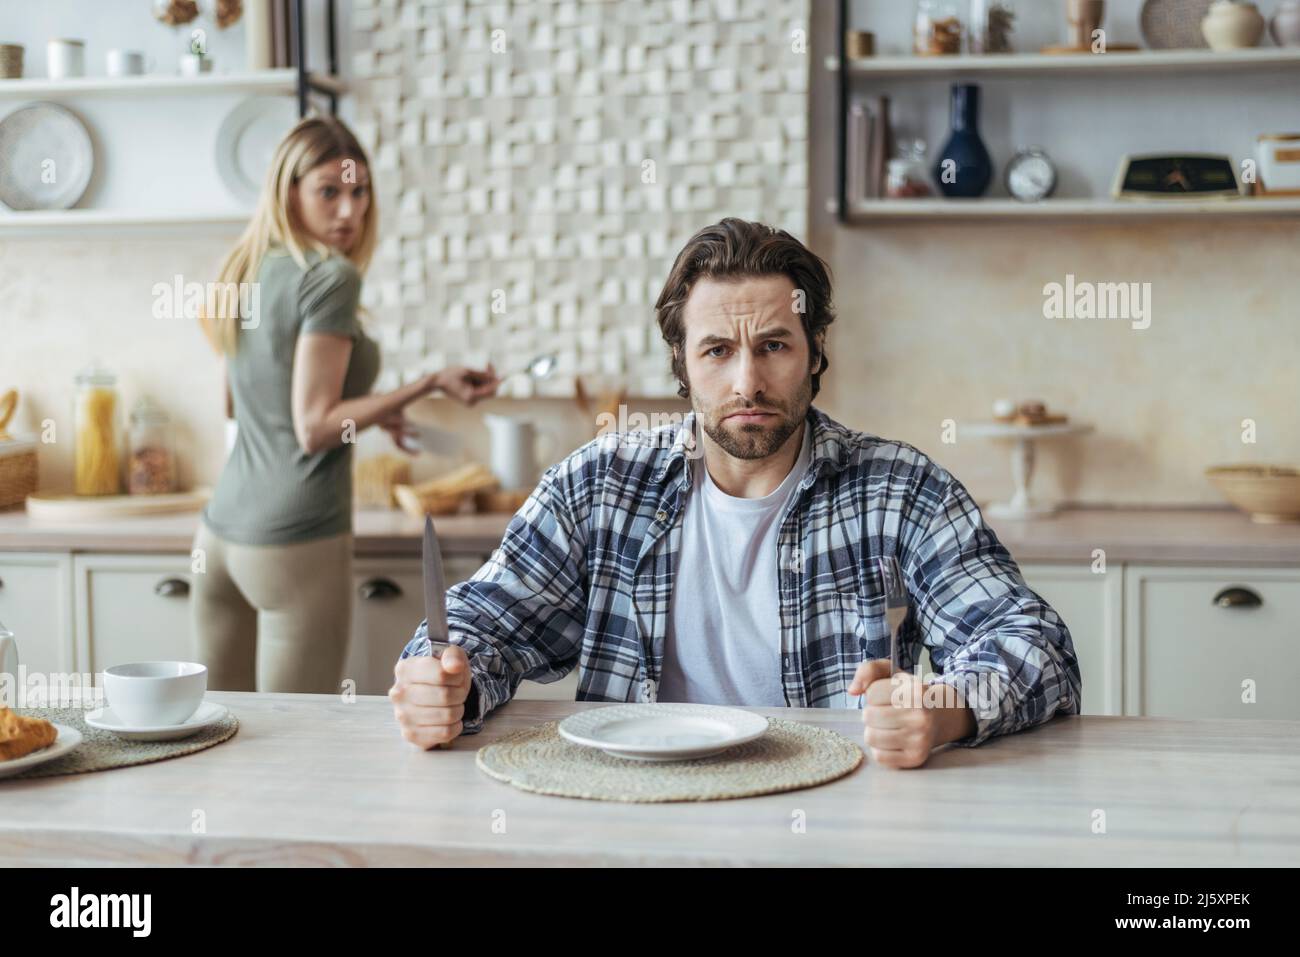 Angry hungry dissatisfied millennial caucasian man with stubble ignoring woman and wait for food in kitchen Stock Photo